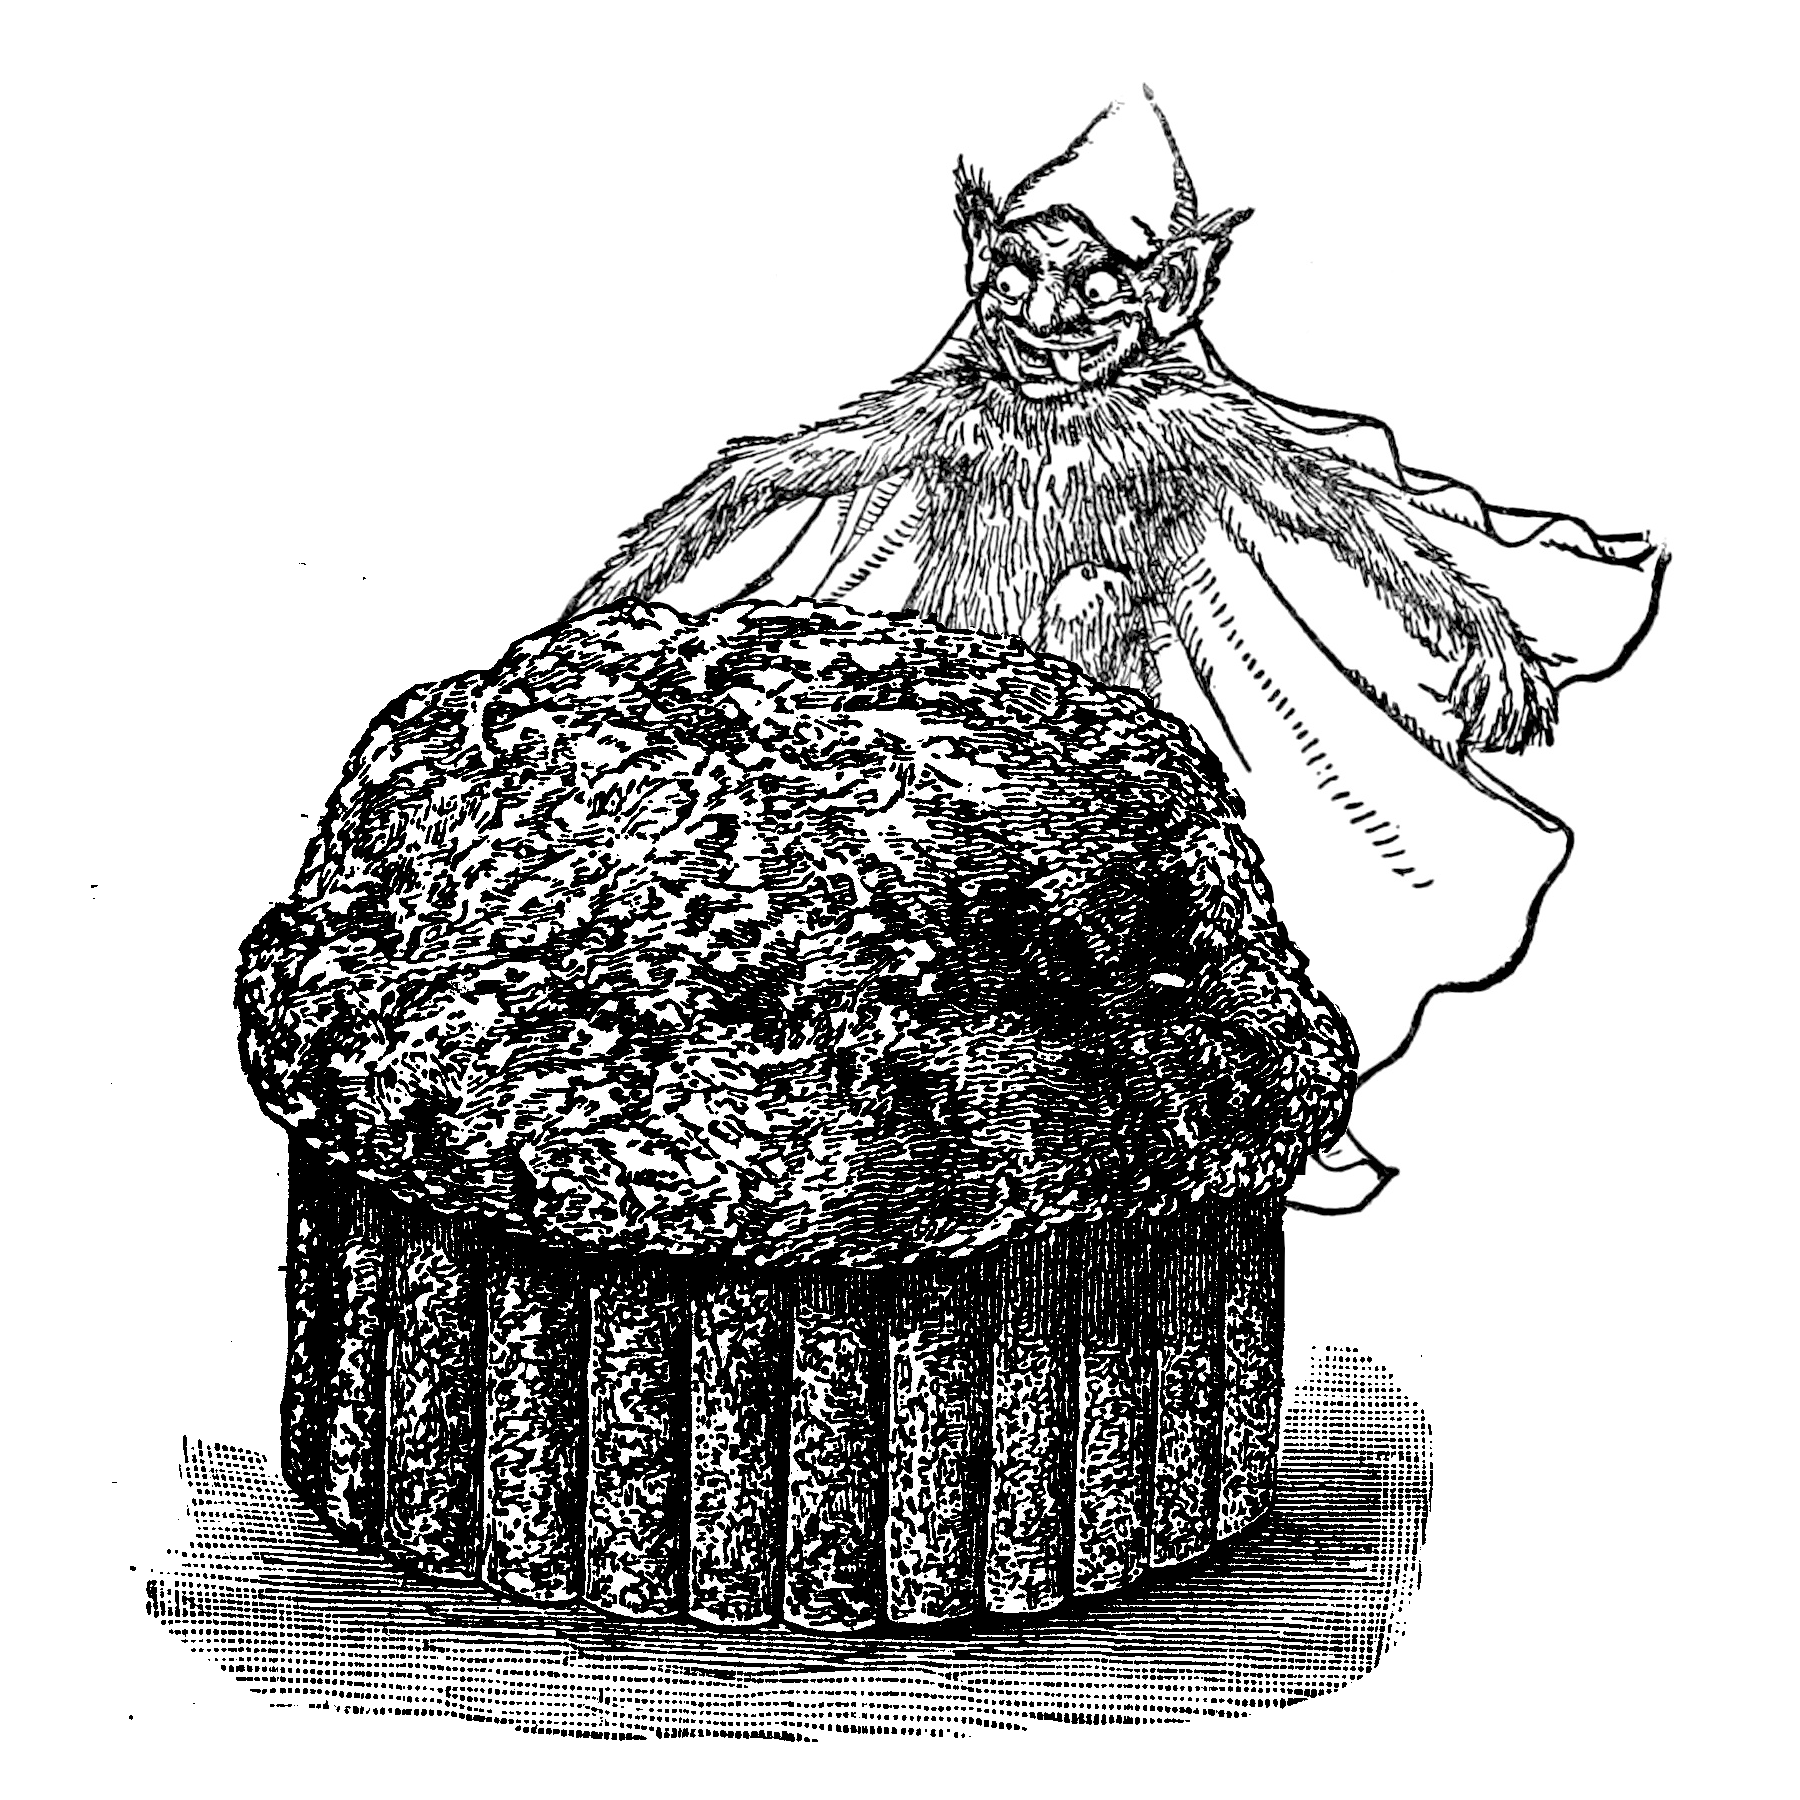 Cake or Death cover image